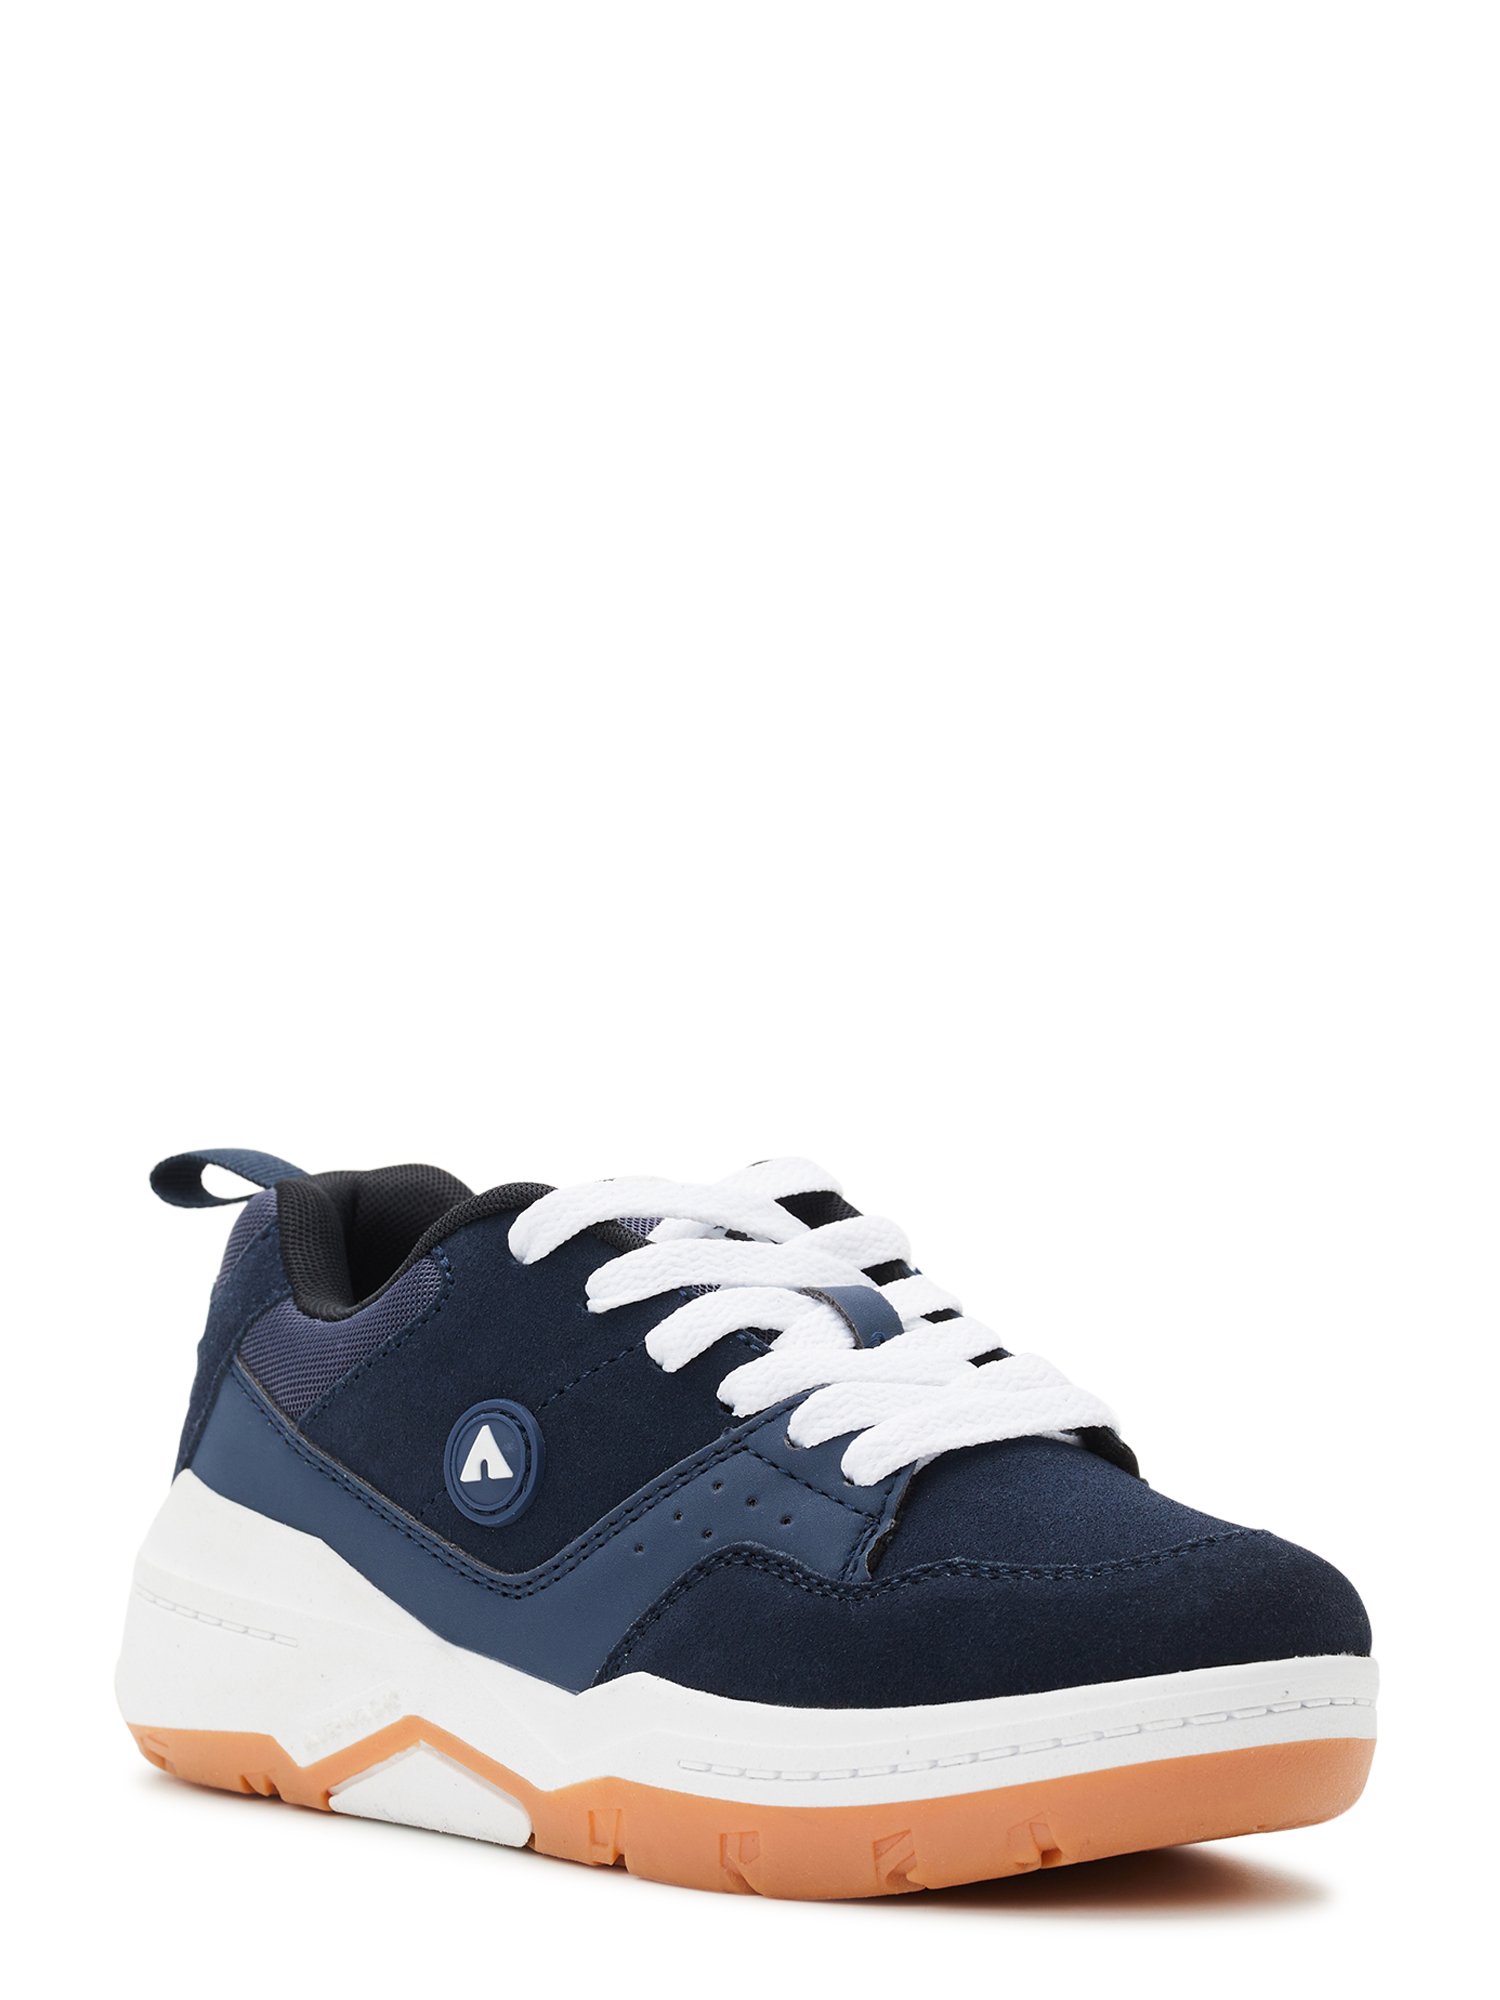 Airwalk Little & Big Boys Lace-up Anchor Low Sneakers, Sizes 13-6